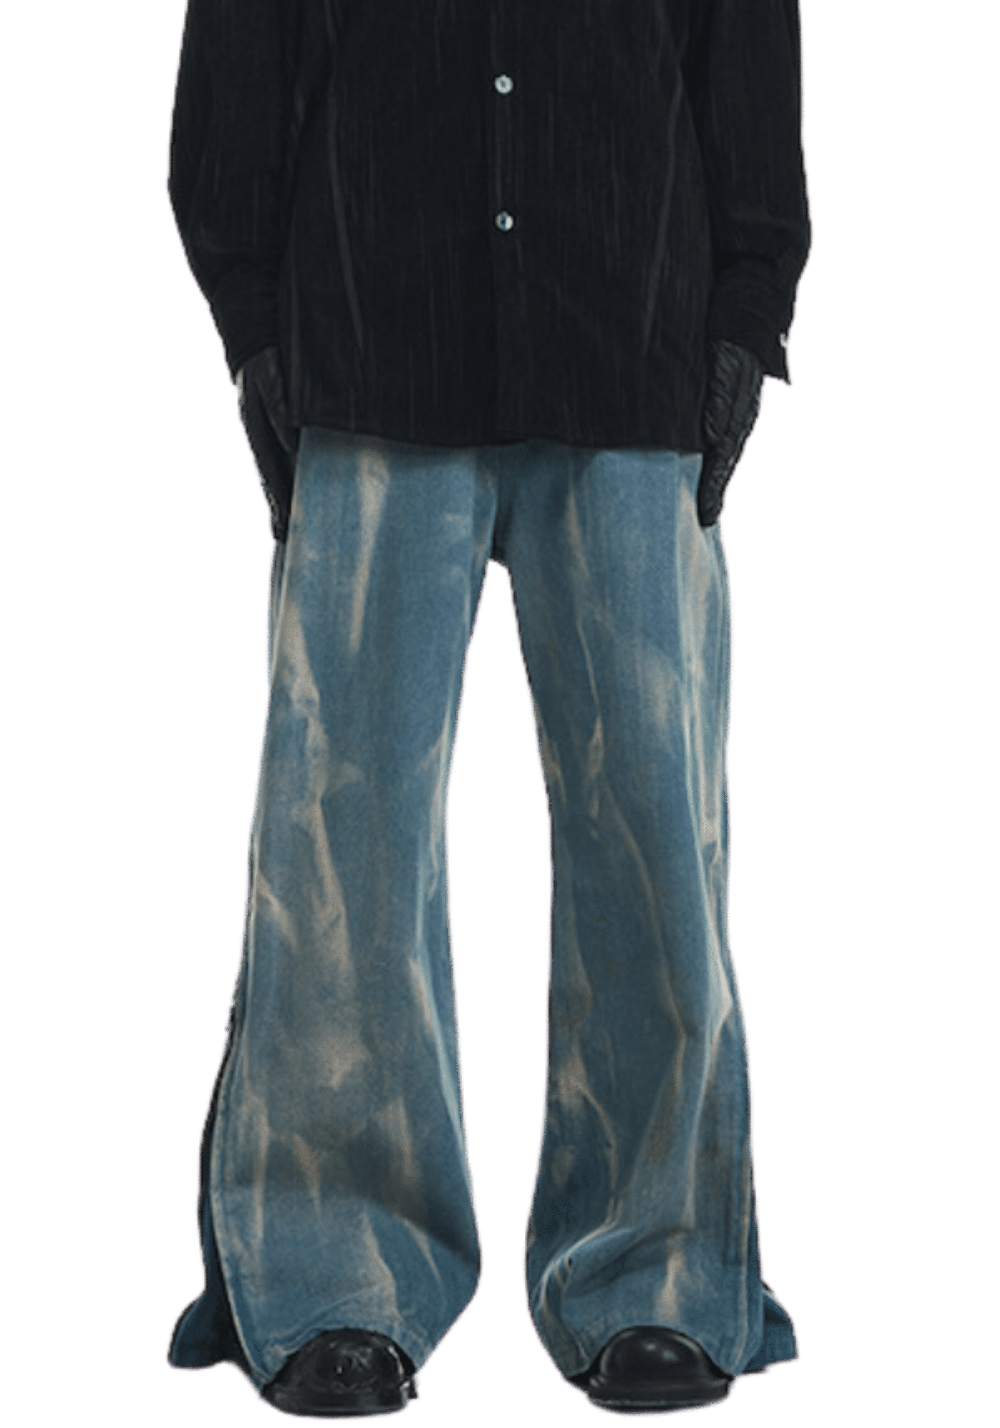 Distressed Straight Jeans - PSYLOS 1, Distressed Straight Jeans, Pants, RELABEL, PSYLOS 1